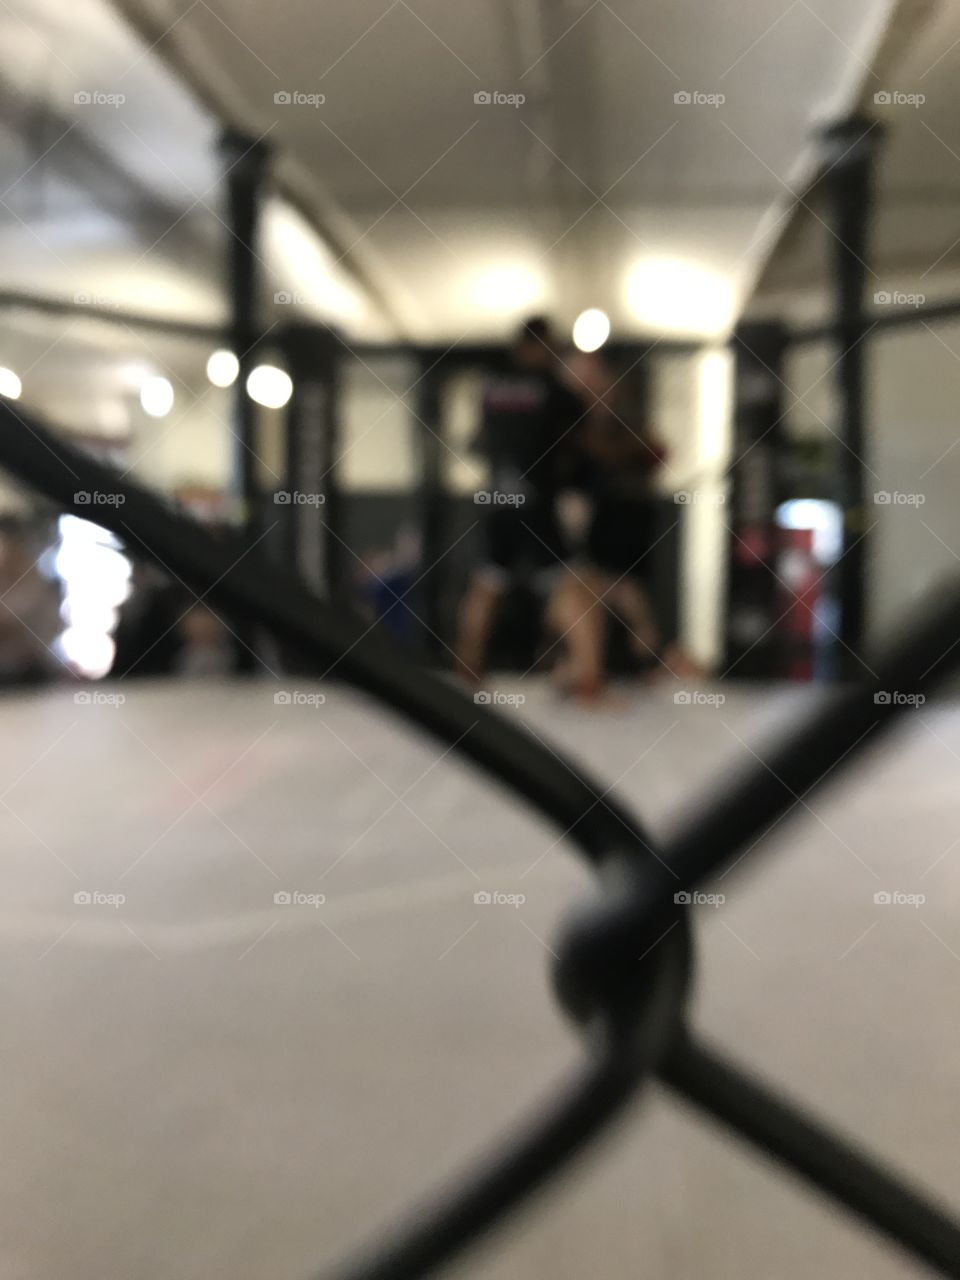 MMA BOXING RING CAGE FOCUS 